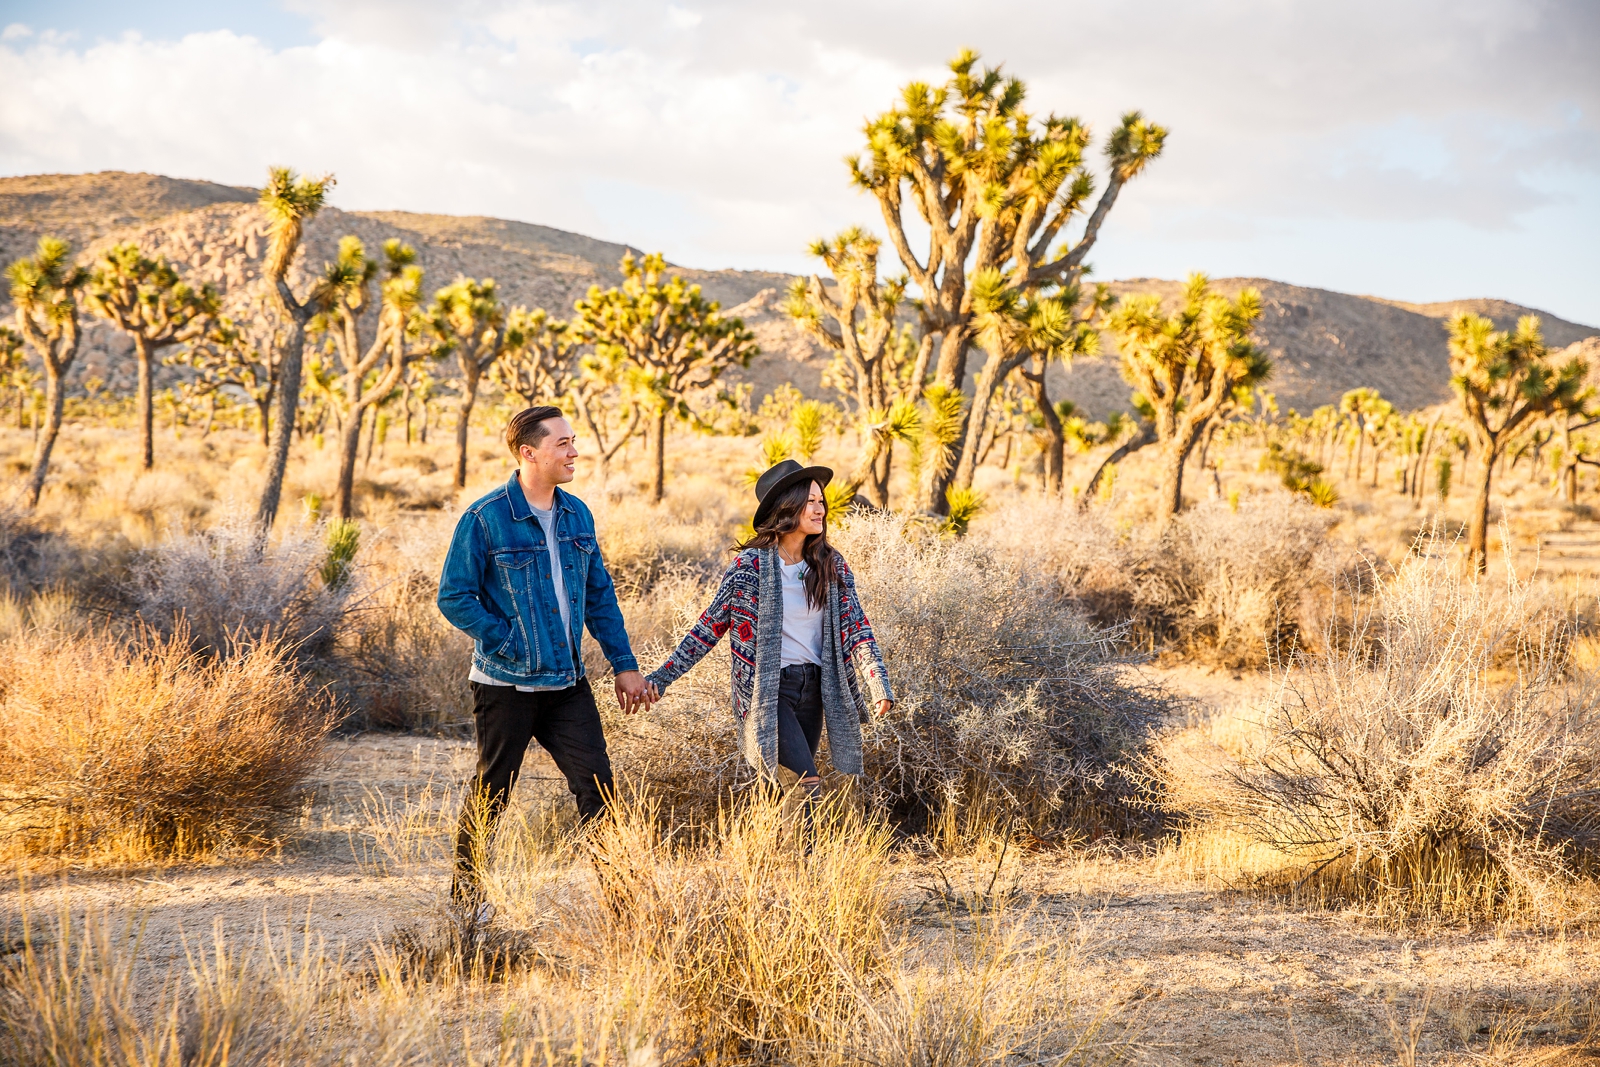 This engaged couple hiked in Joshua Tree NP.